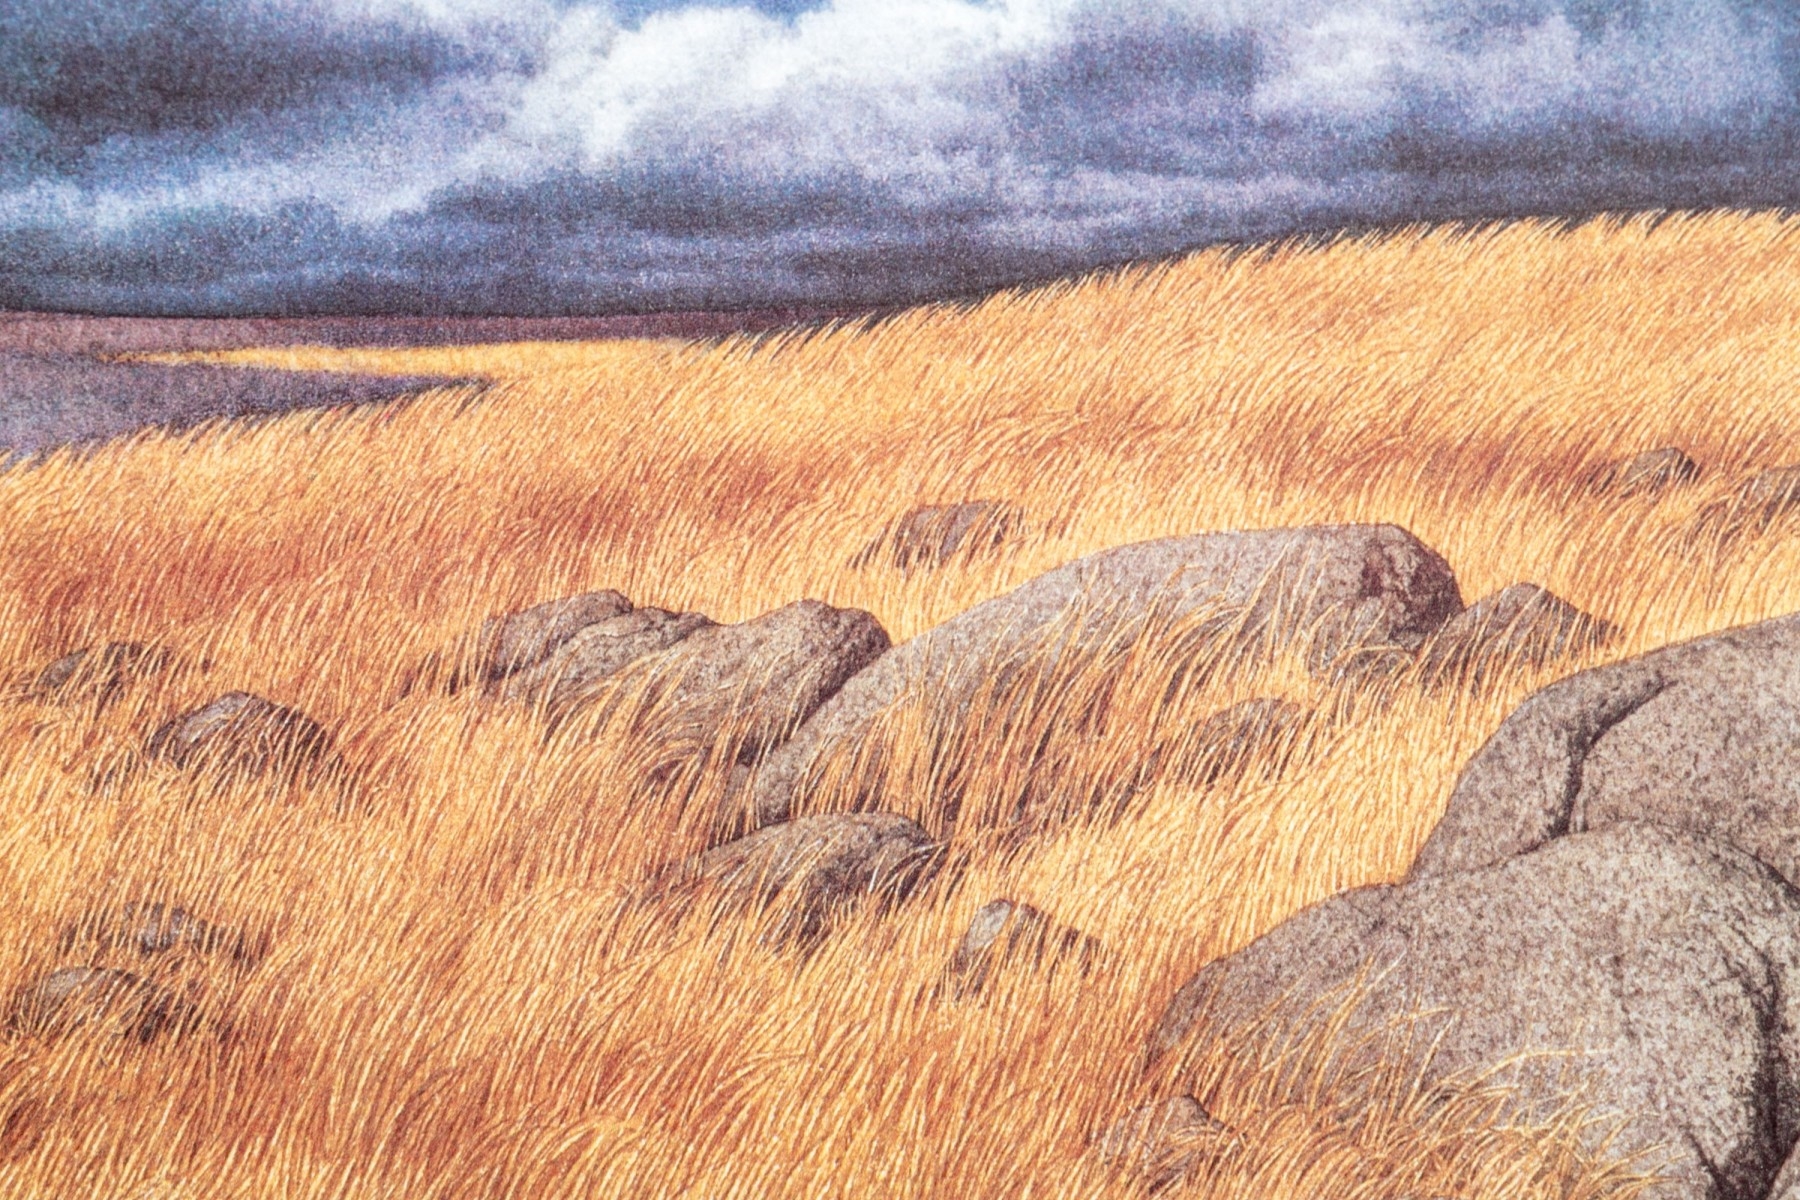 Artwork by Bev Doolittle, Calling the Buffalo., Made of lithograph